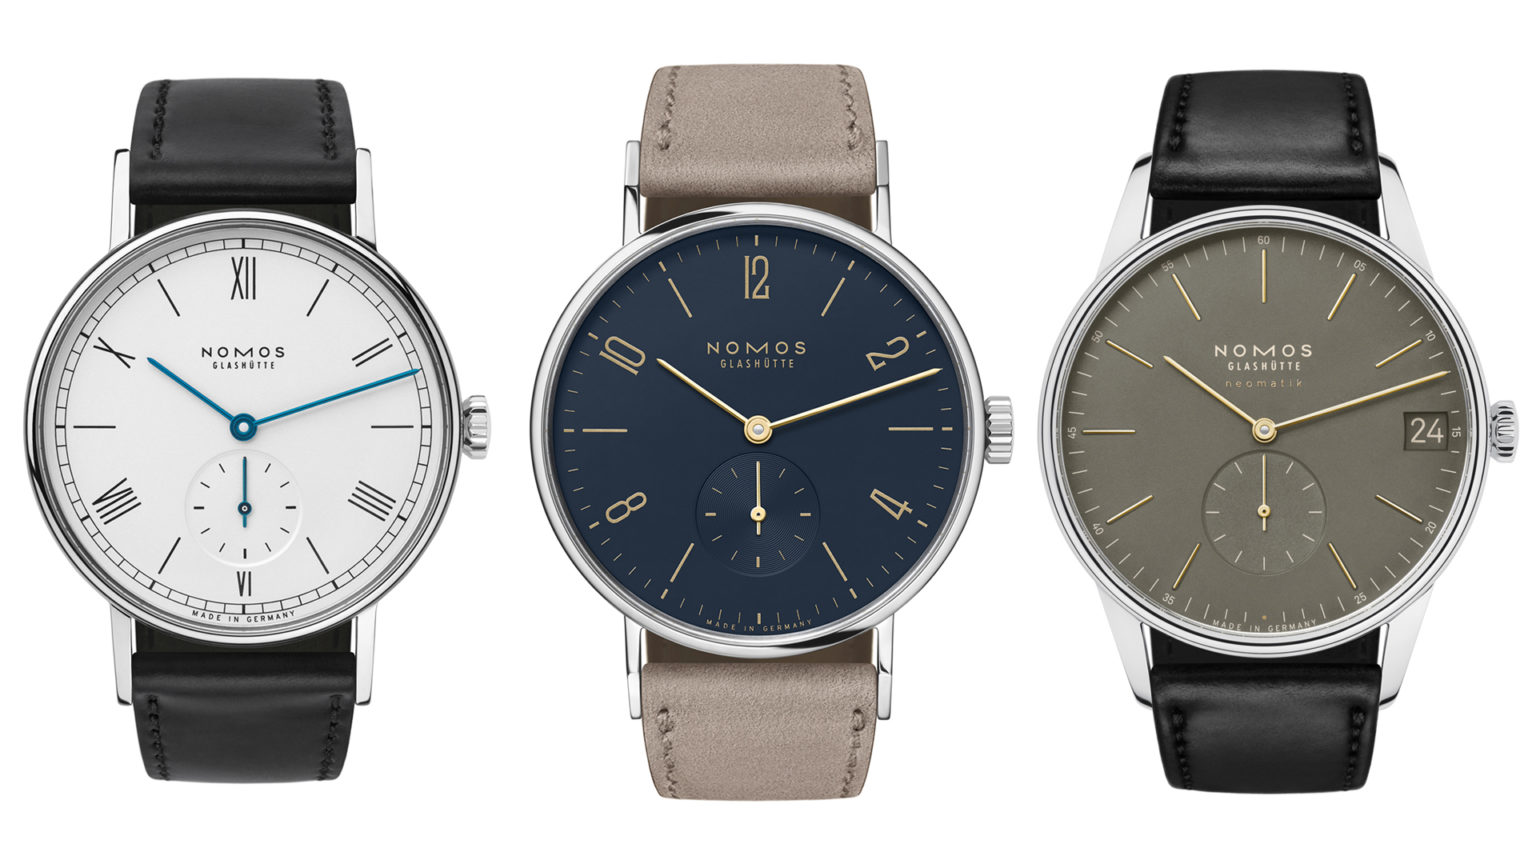 Back To The Basics With German Nomos Watches | aBlogtoWatch